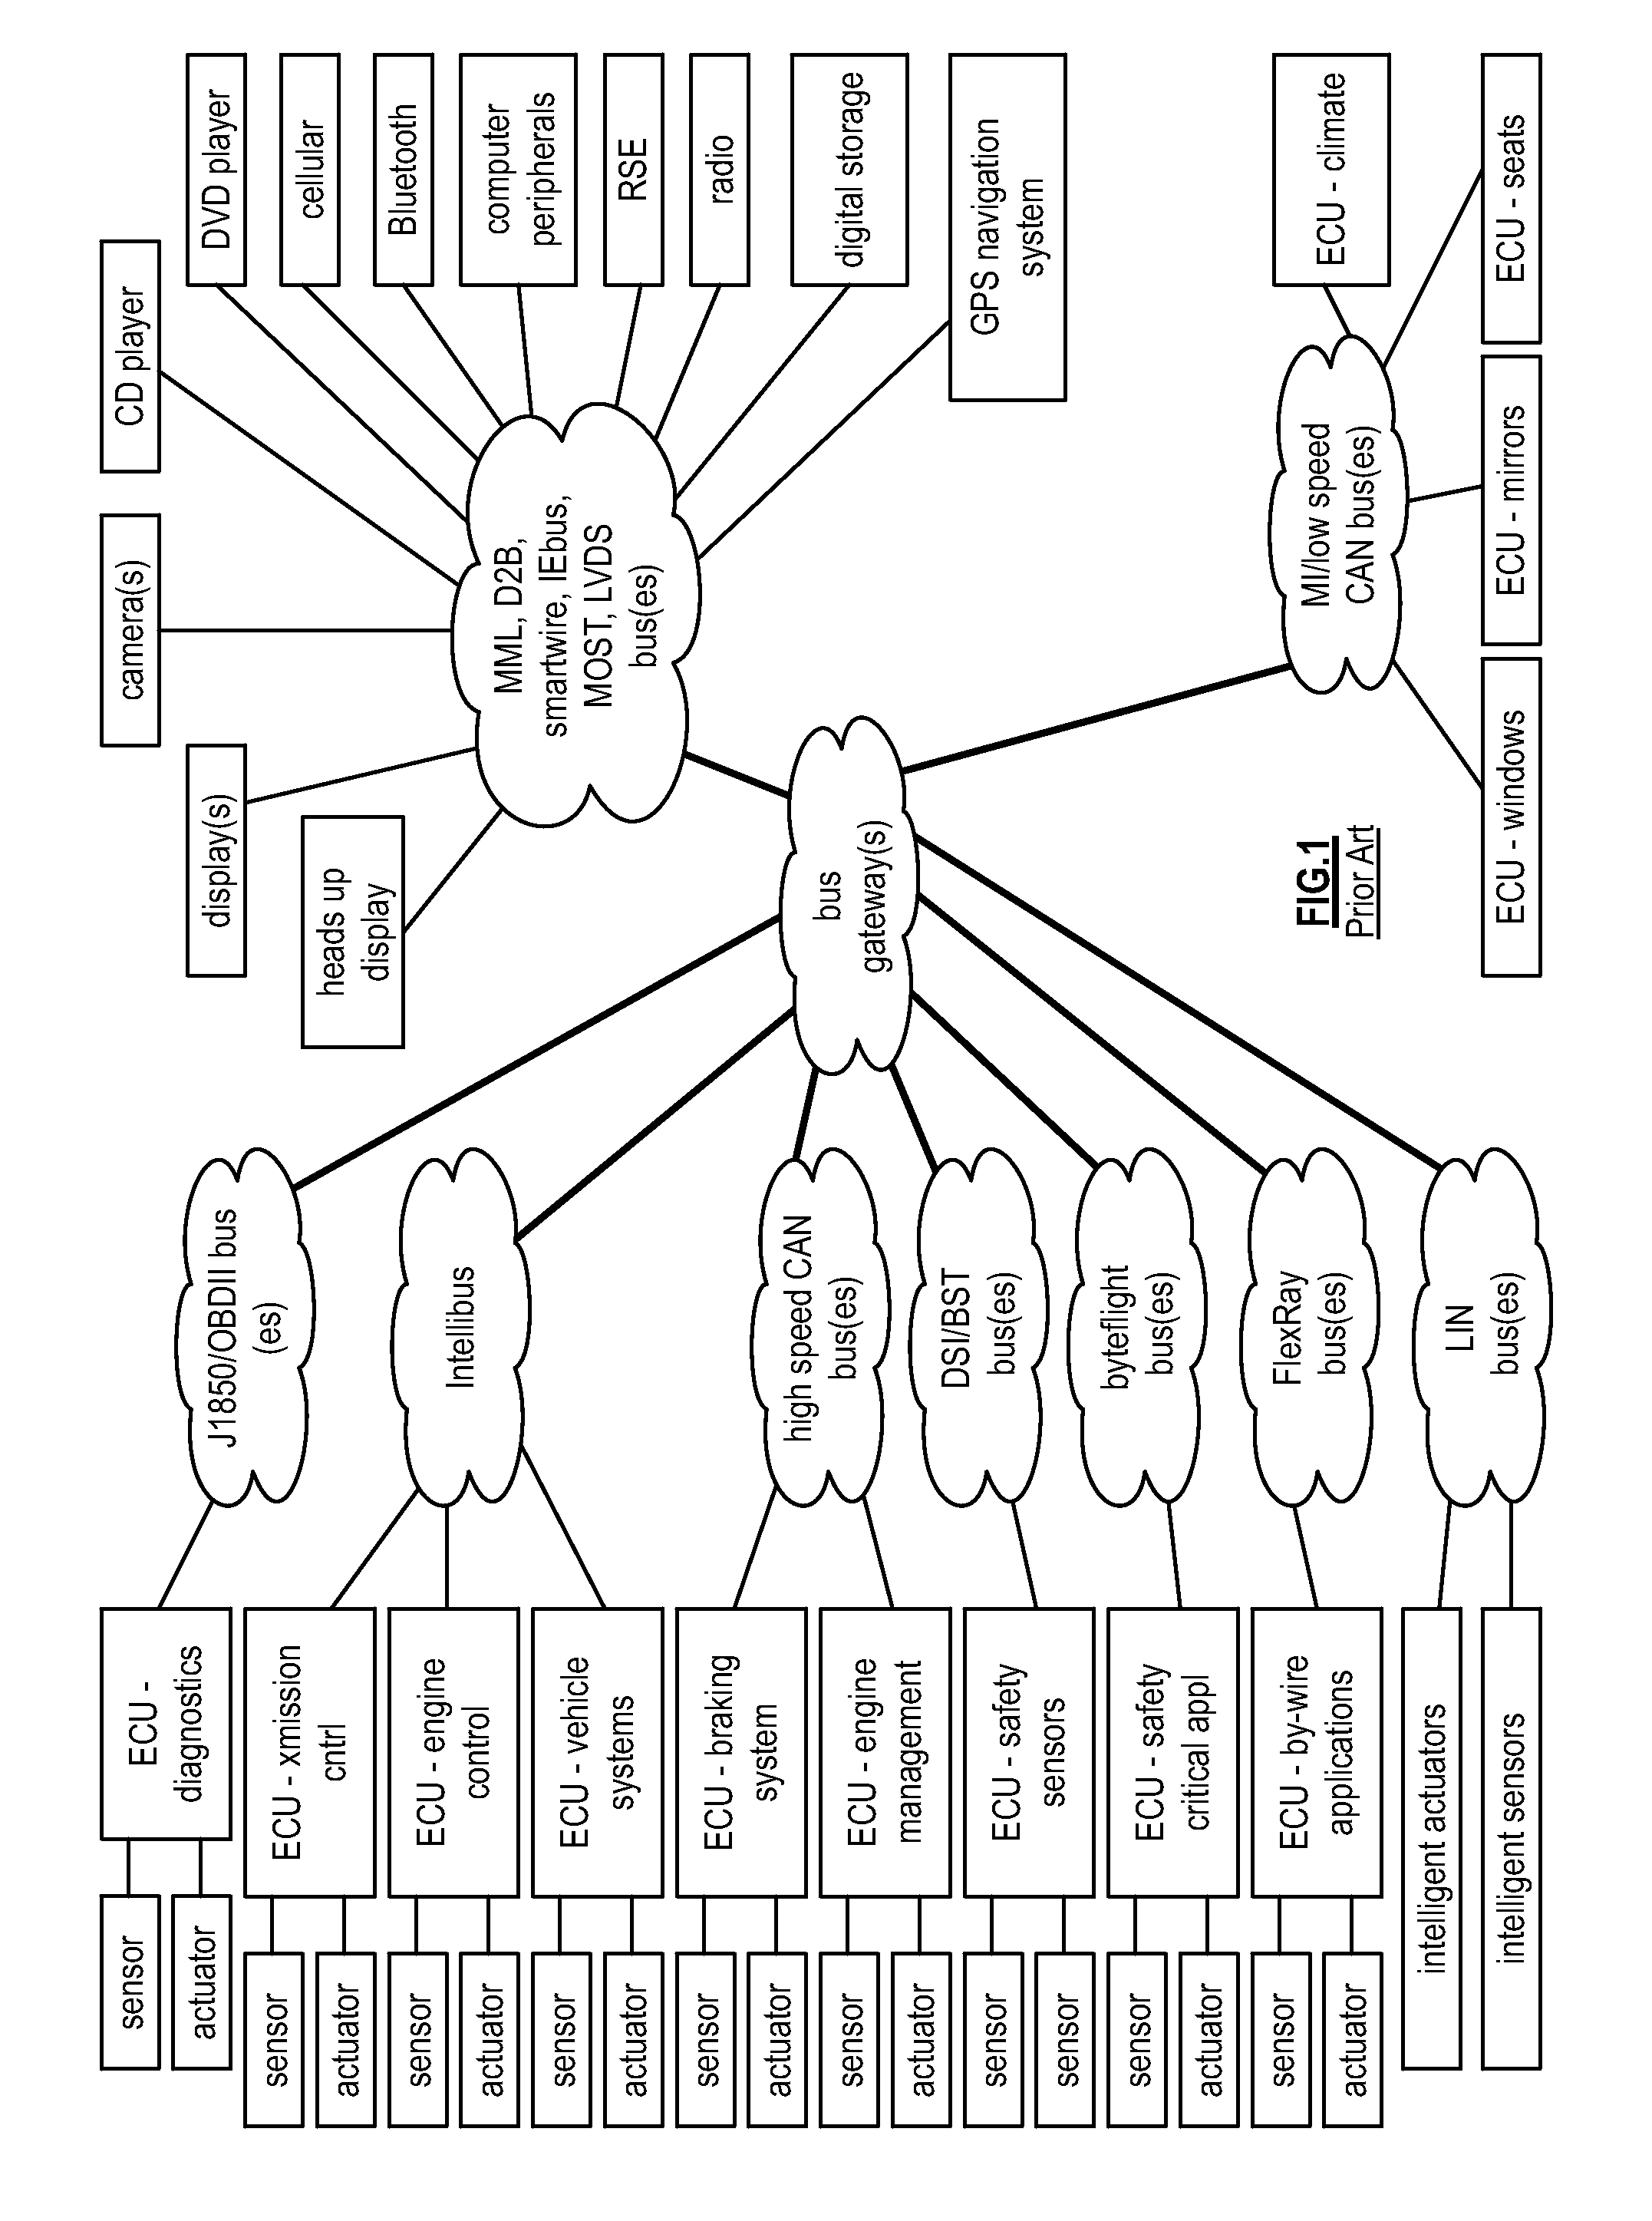 Providing power over ethernet within a vehicular communication network